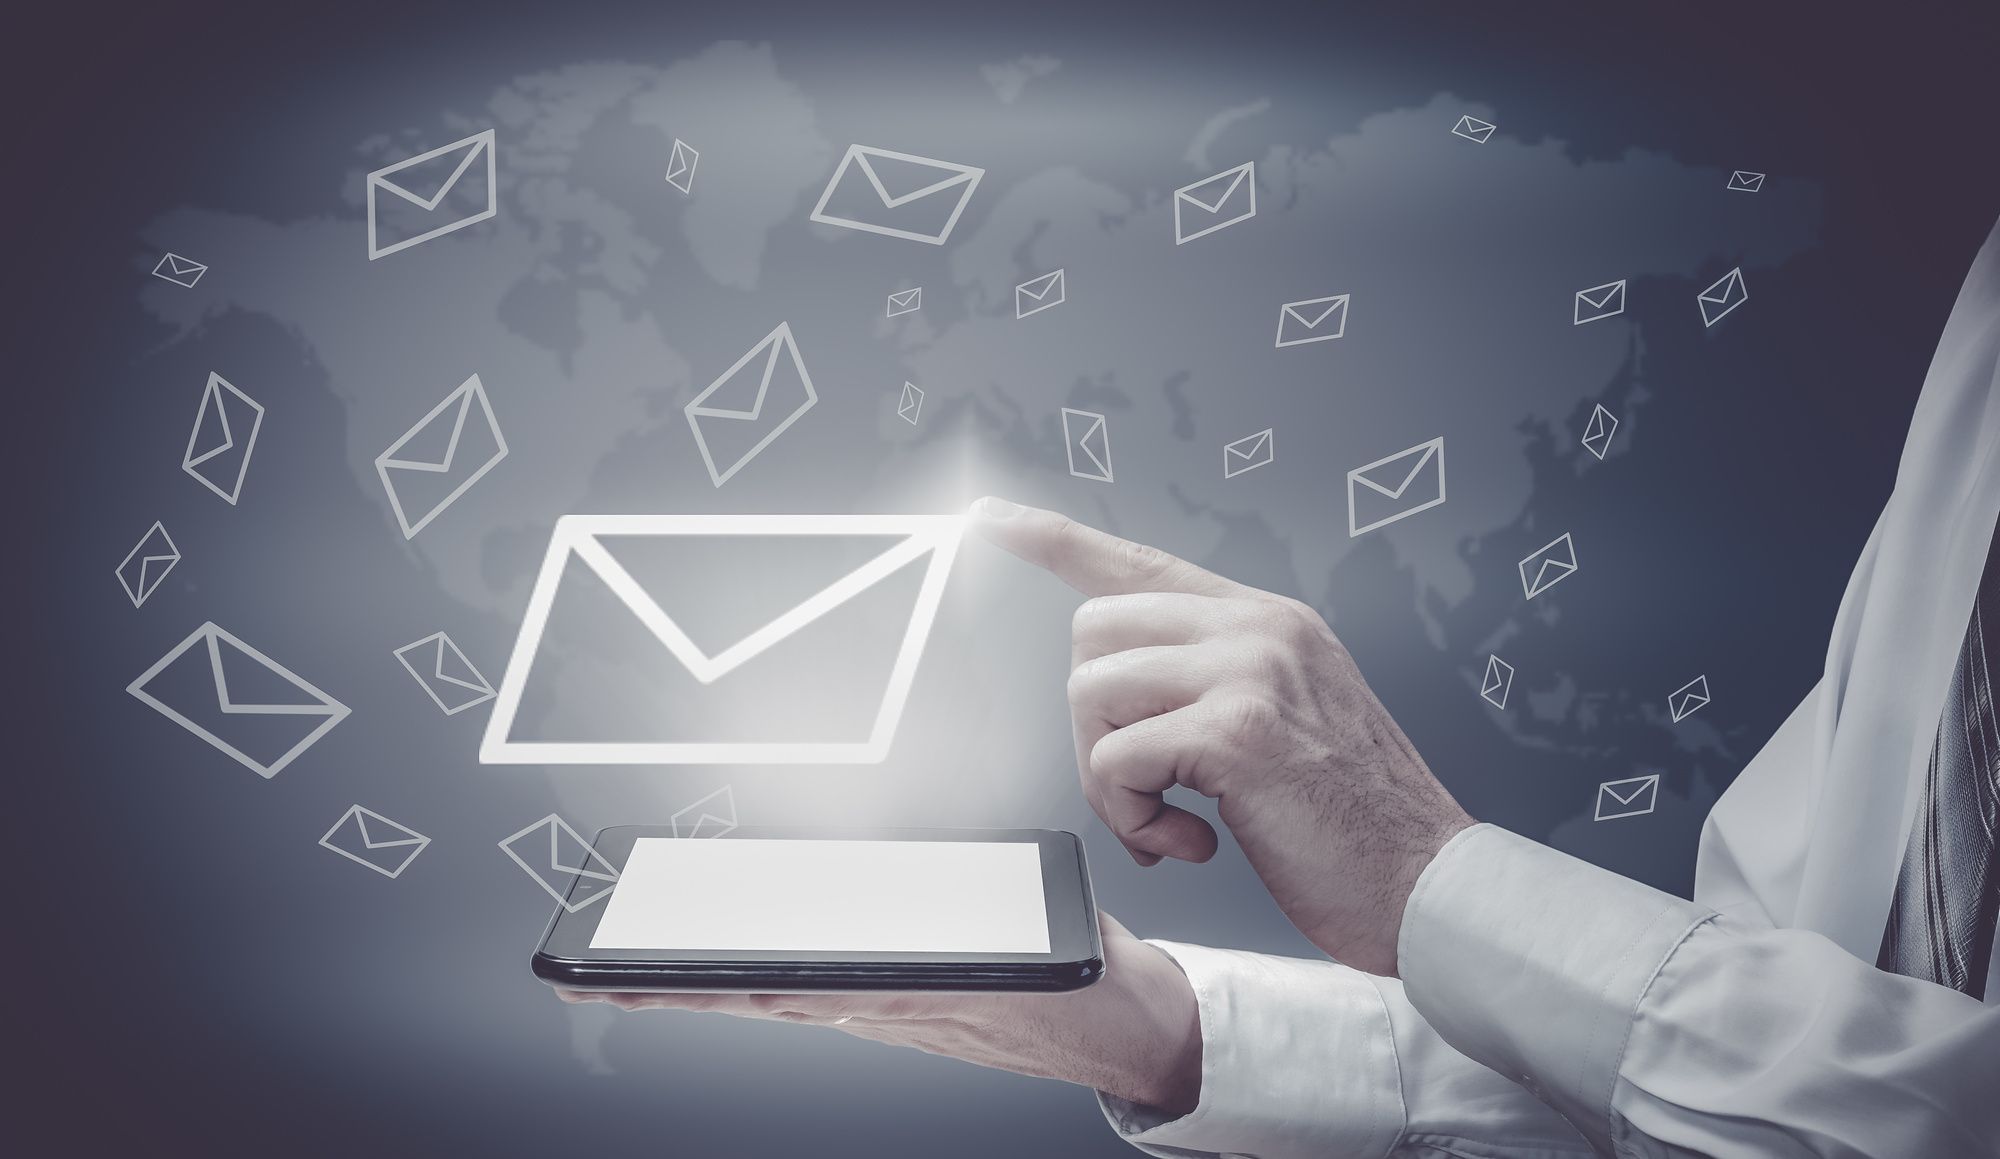 How to Organize Your Email: 6 Essential and Time-Saving Tips